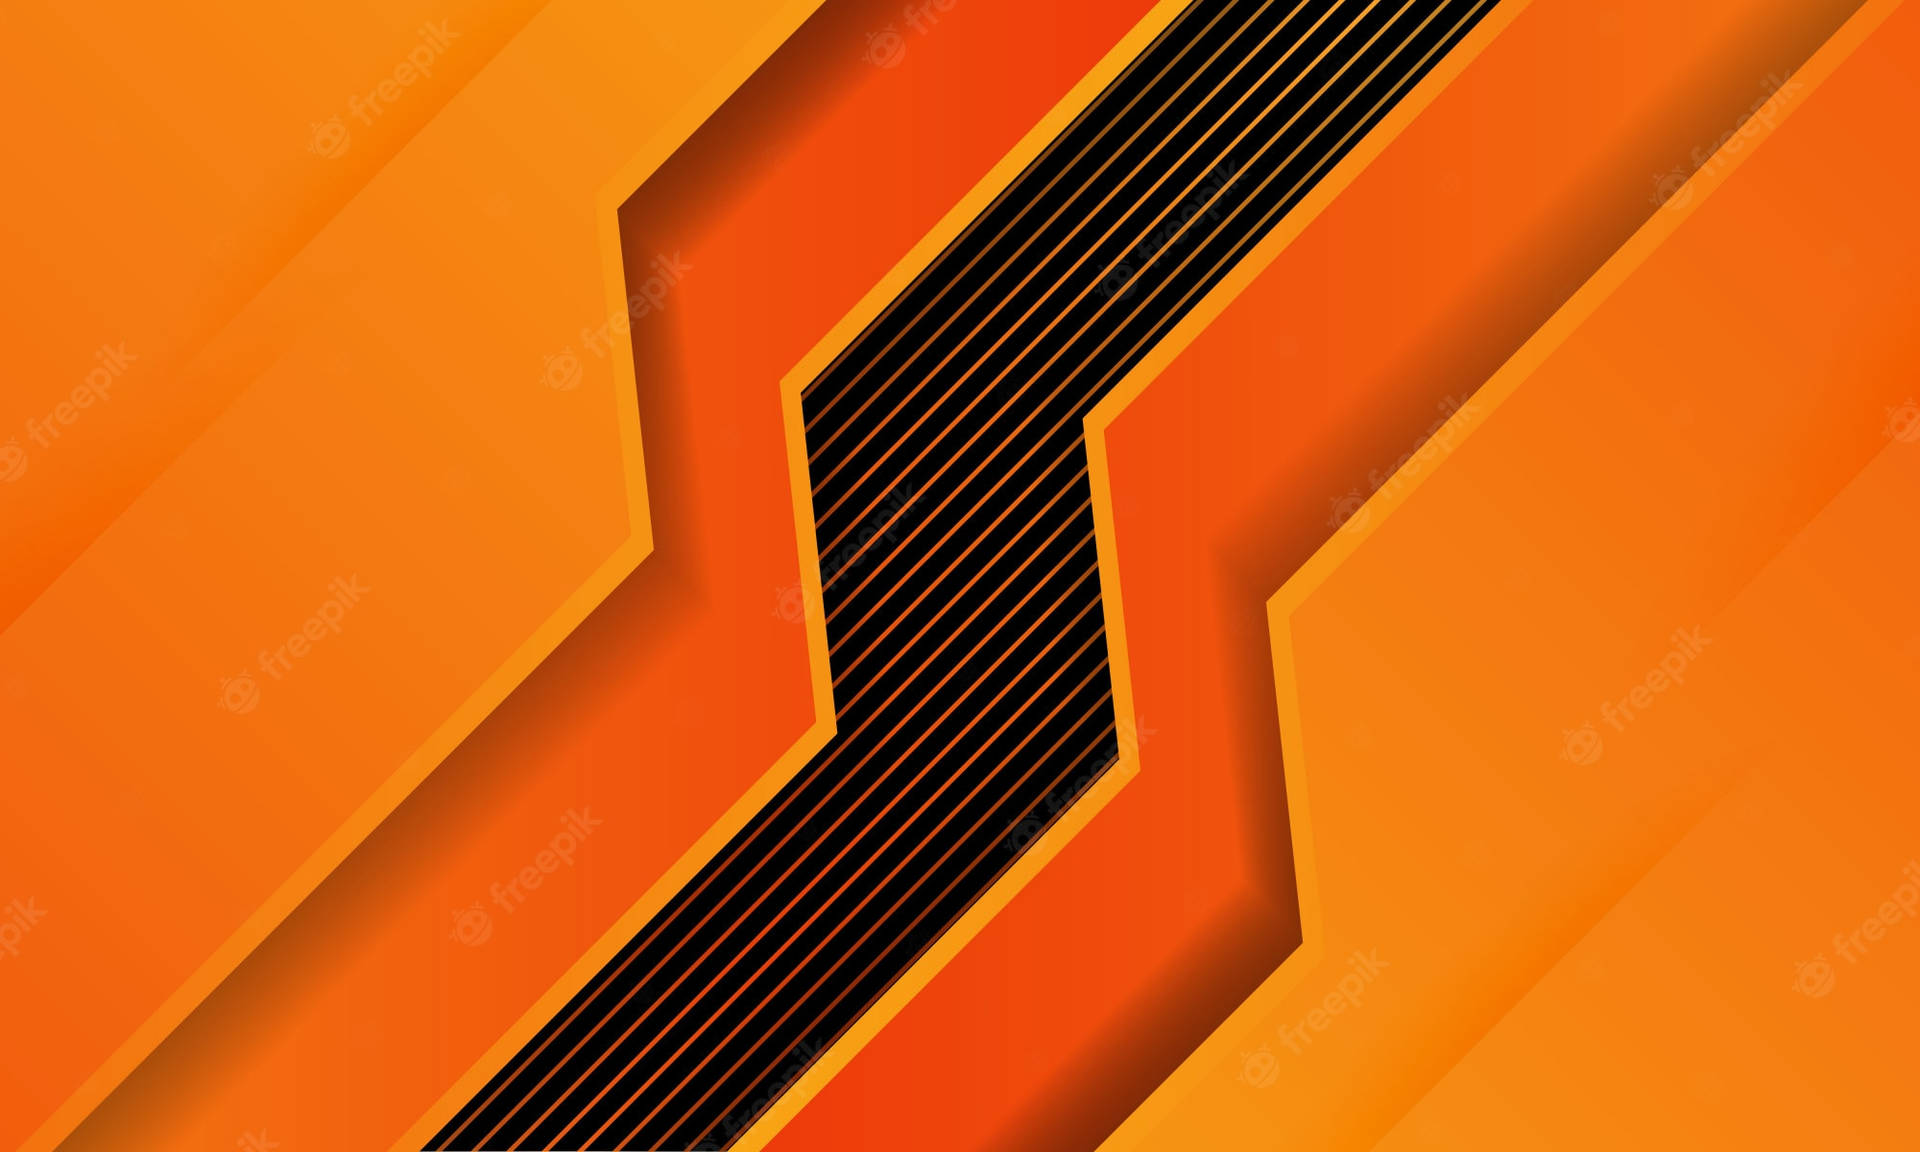 Abstract Orange And Black Striped Background Wallpaper